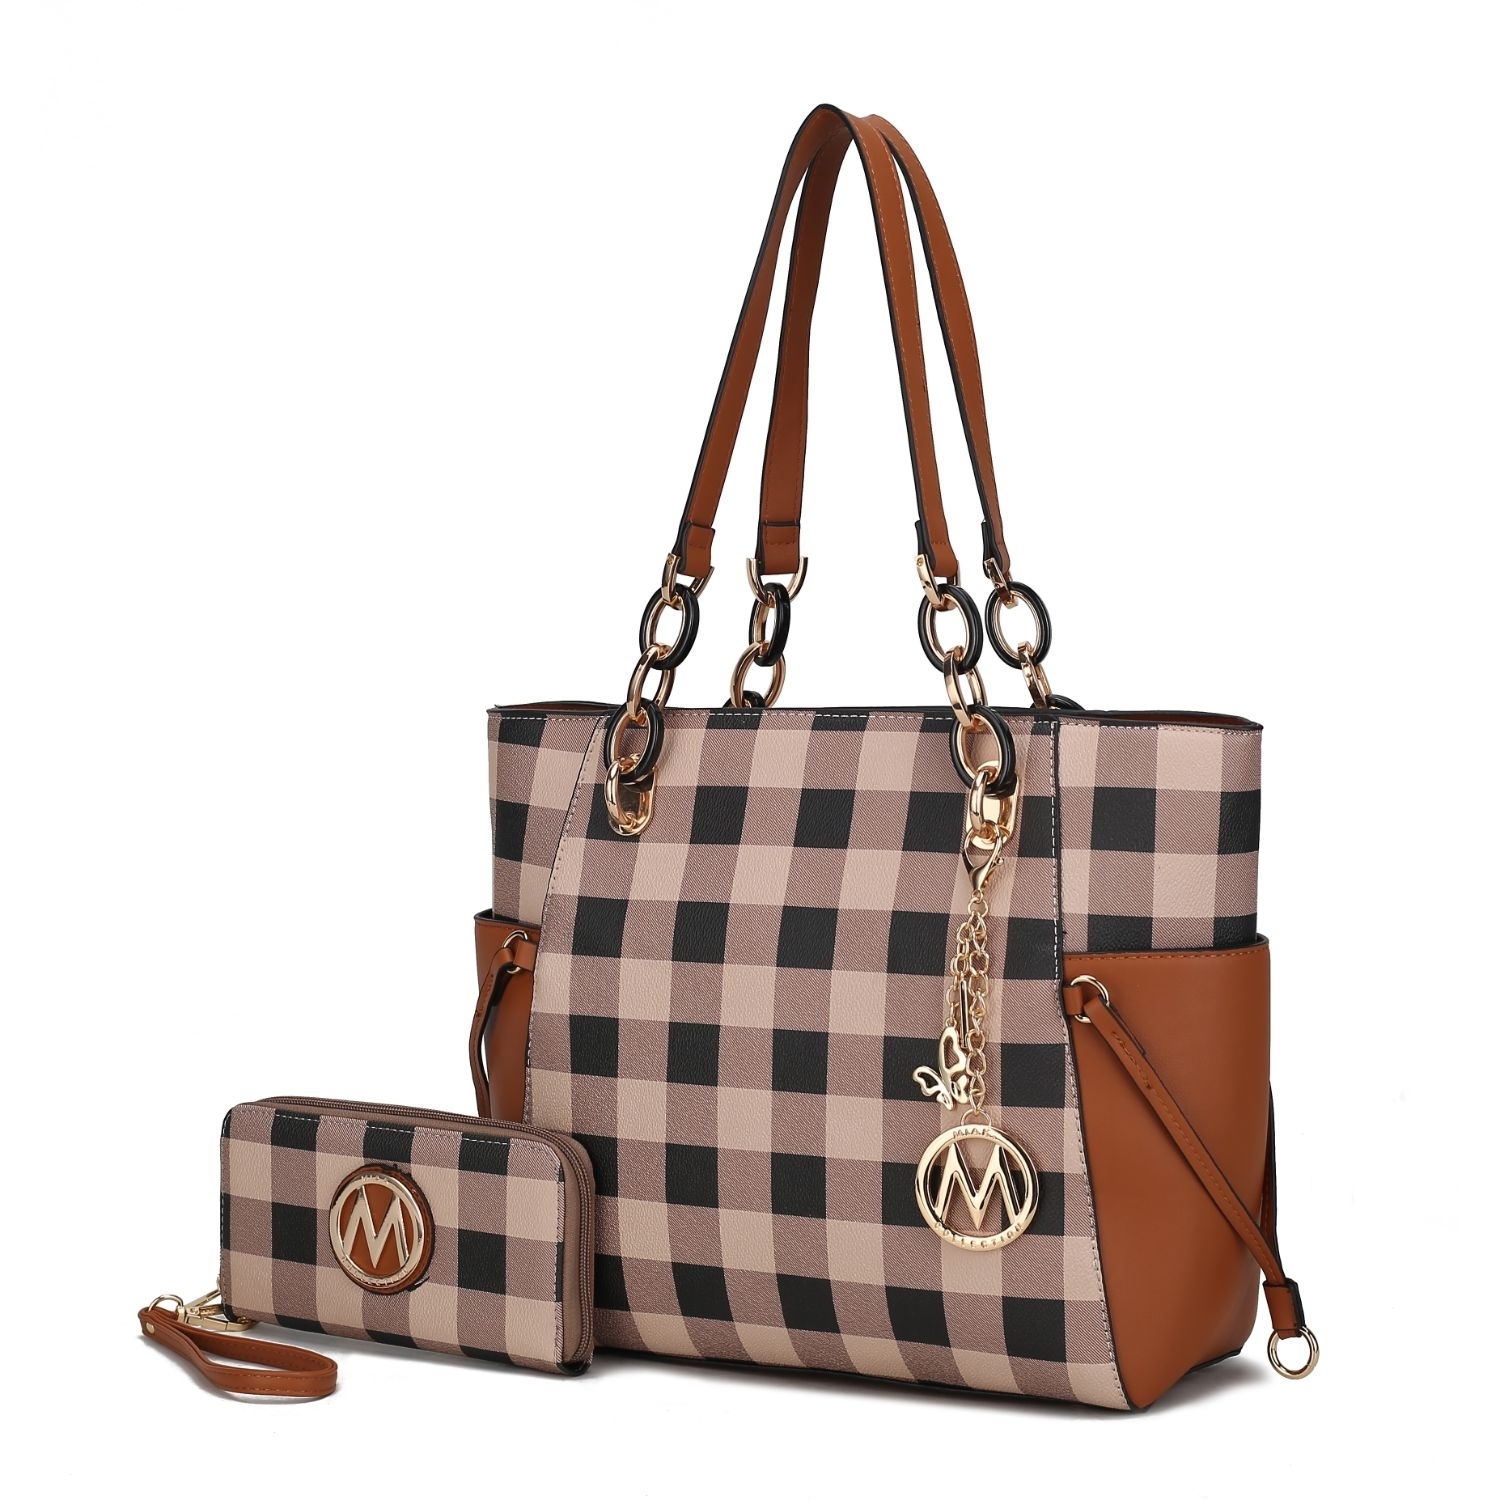 MKF Collection Yale Checkered Tote Handbag With Wallet By Mia K. - Cognac Brown